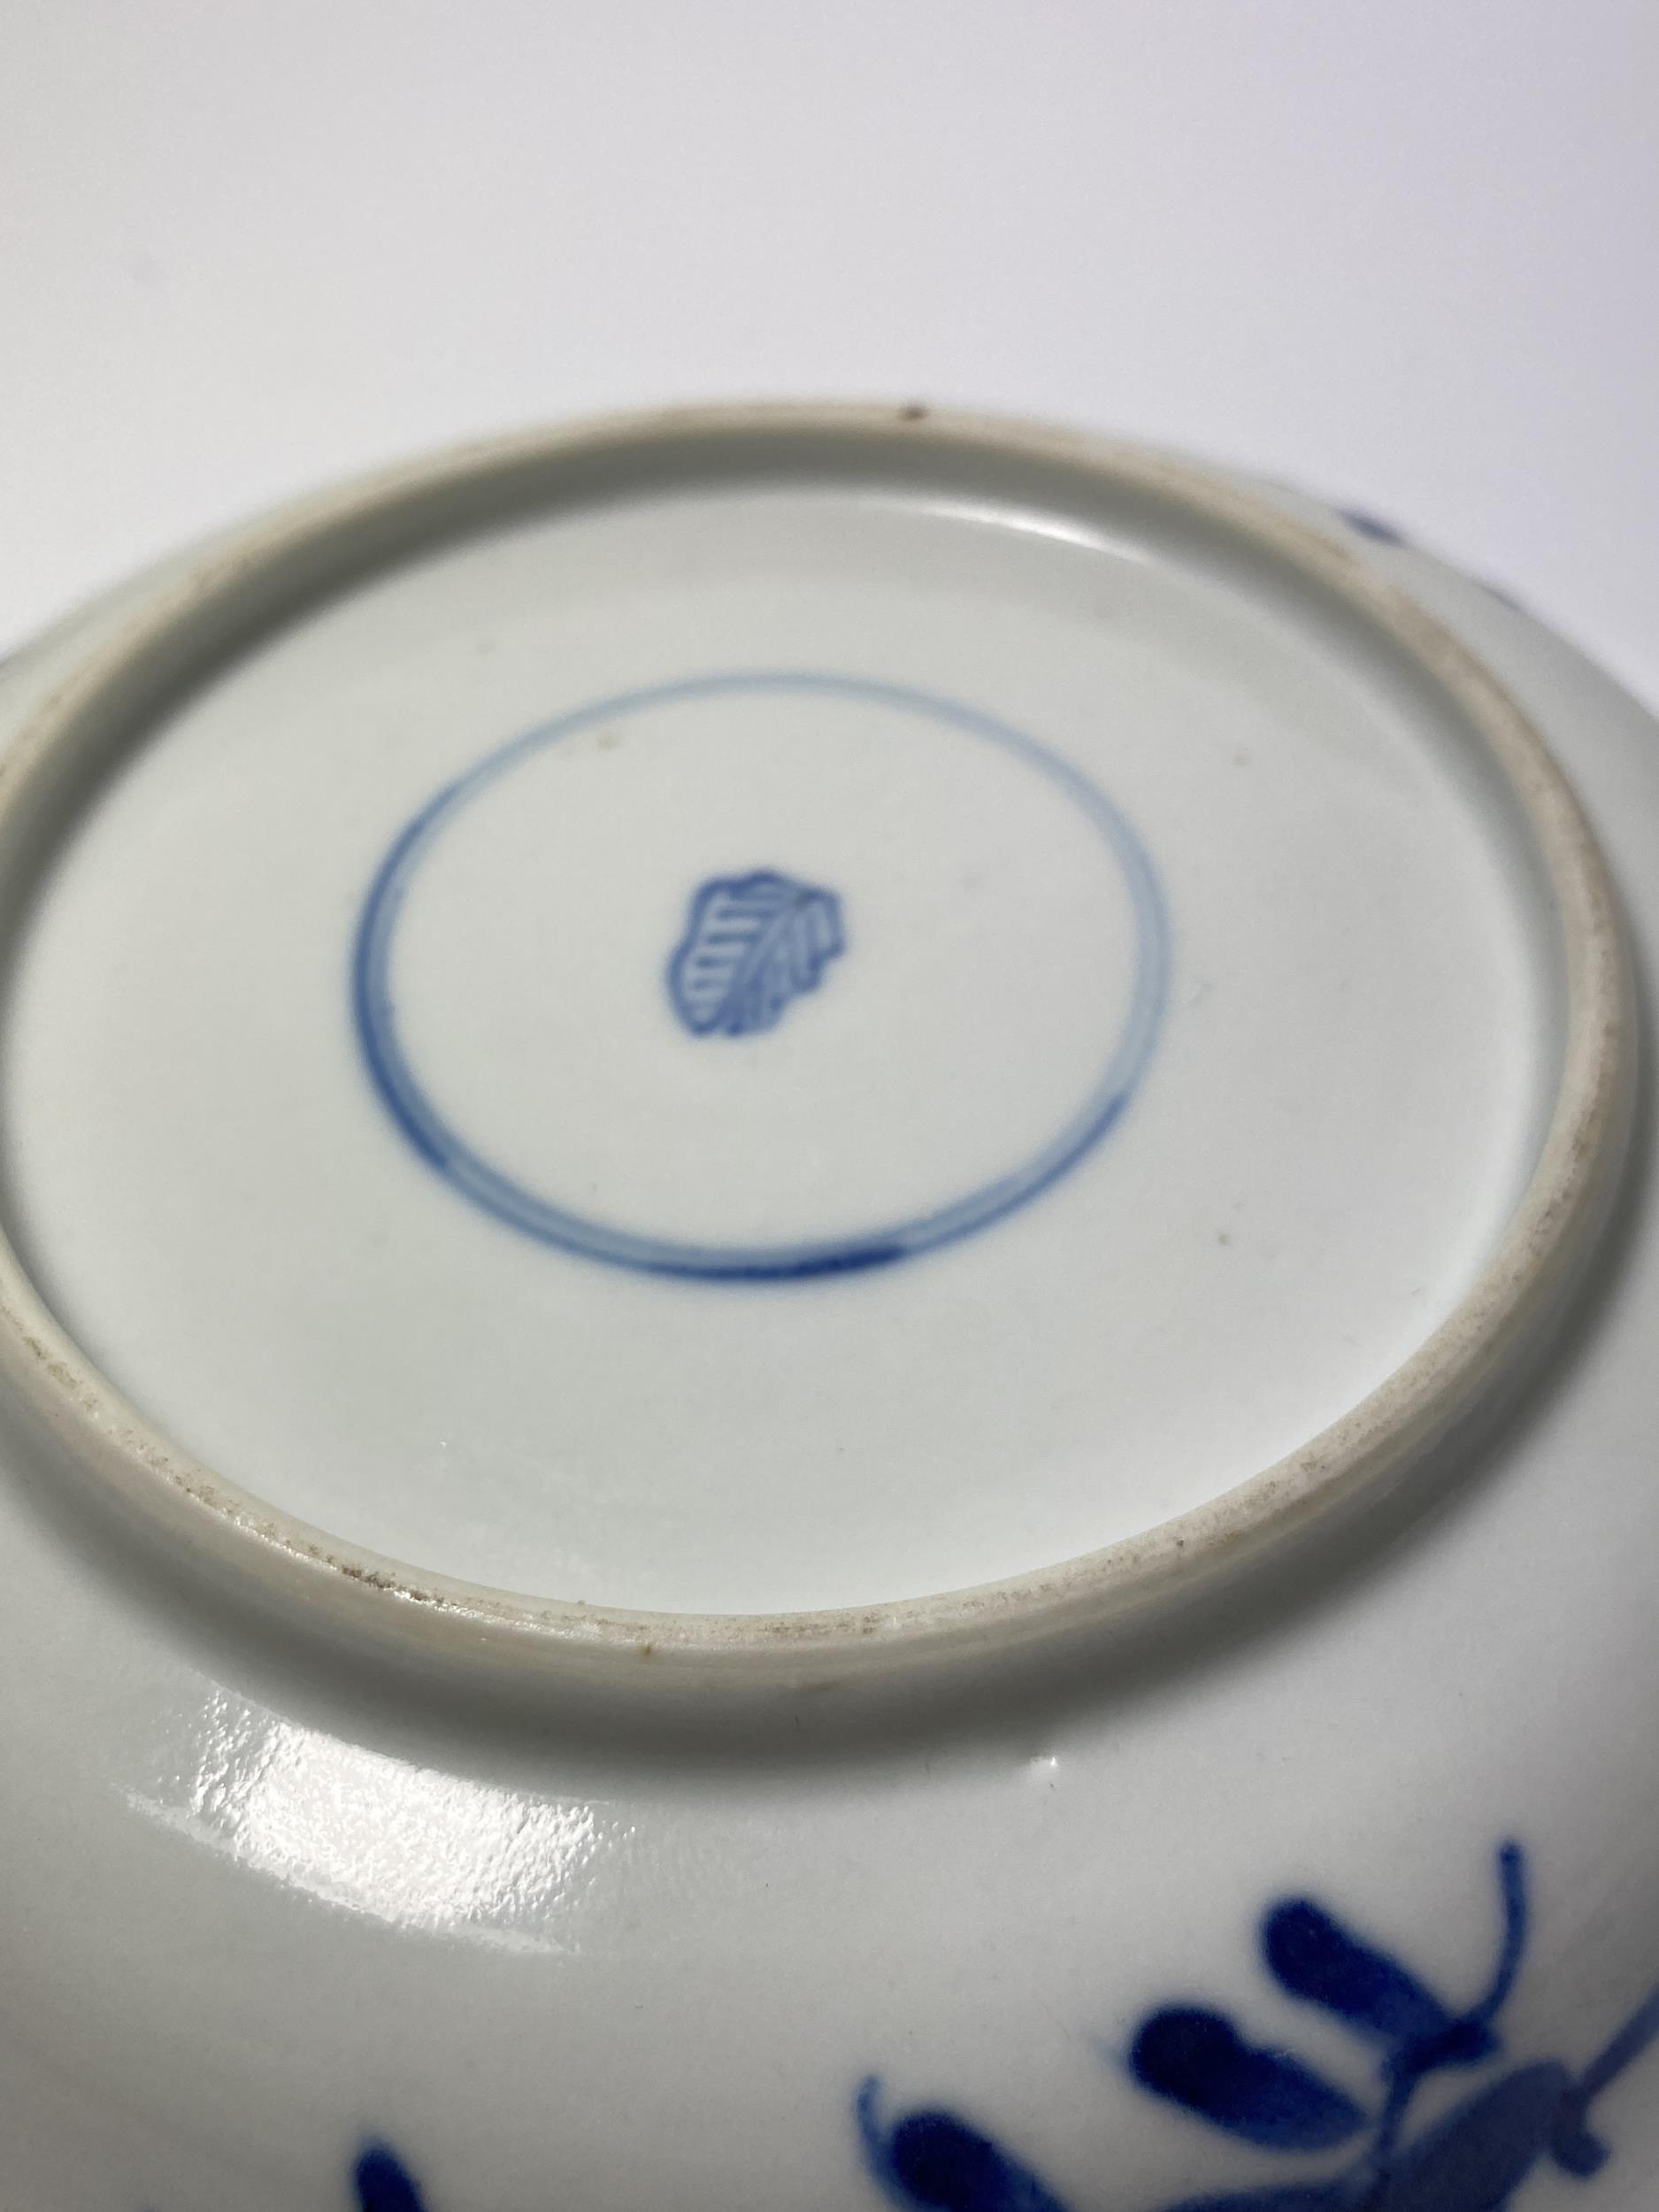 A PAIR OF KANGXI PERIOD (1661-1722) CHINESE BLUE AND WHITE PORCELAIN PLATES, ARTEMESIA LEAF MARK - Image 11 of 13